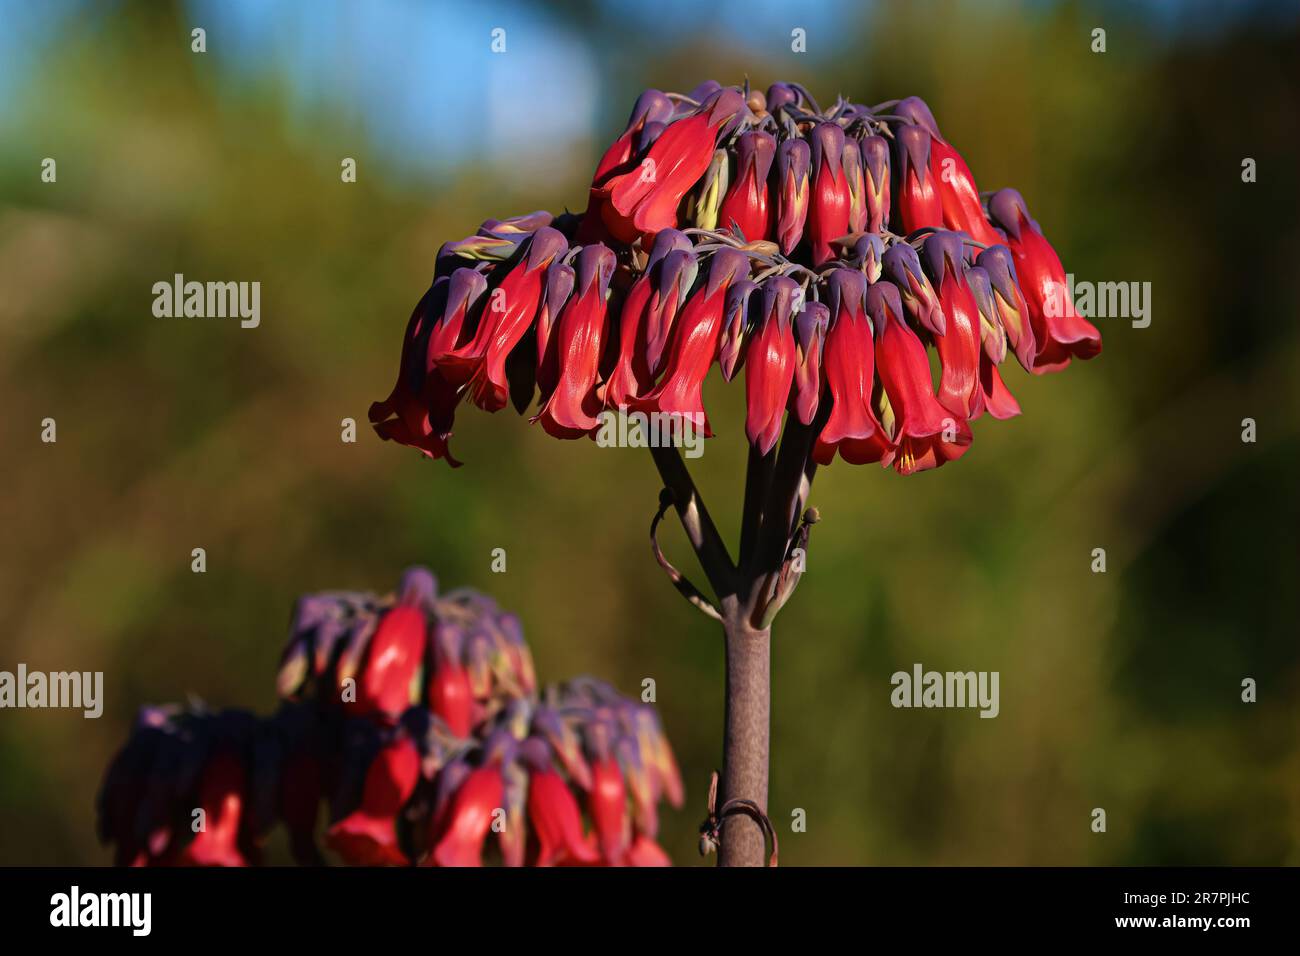 Beautiful plants and red Kalanchoe Delagoensis Eckl & Zeyh flowers outside in the garden on a sunny warm day, shot up close in macro. Stock Photo